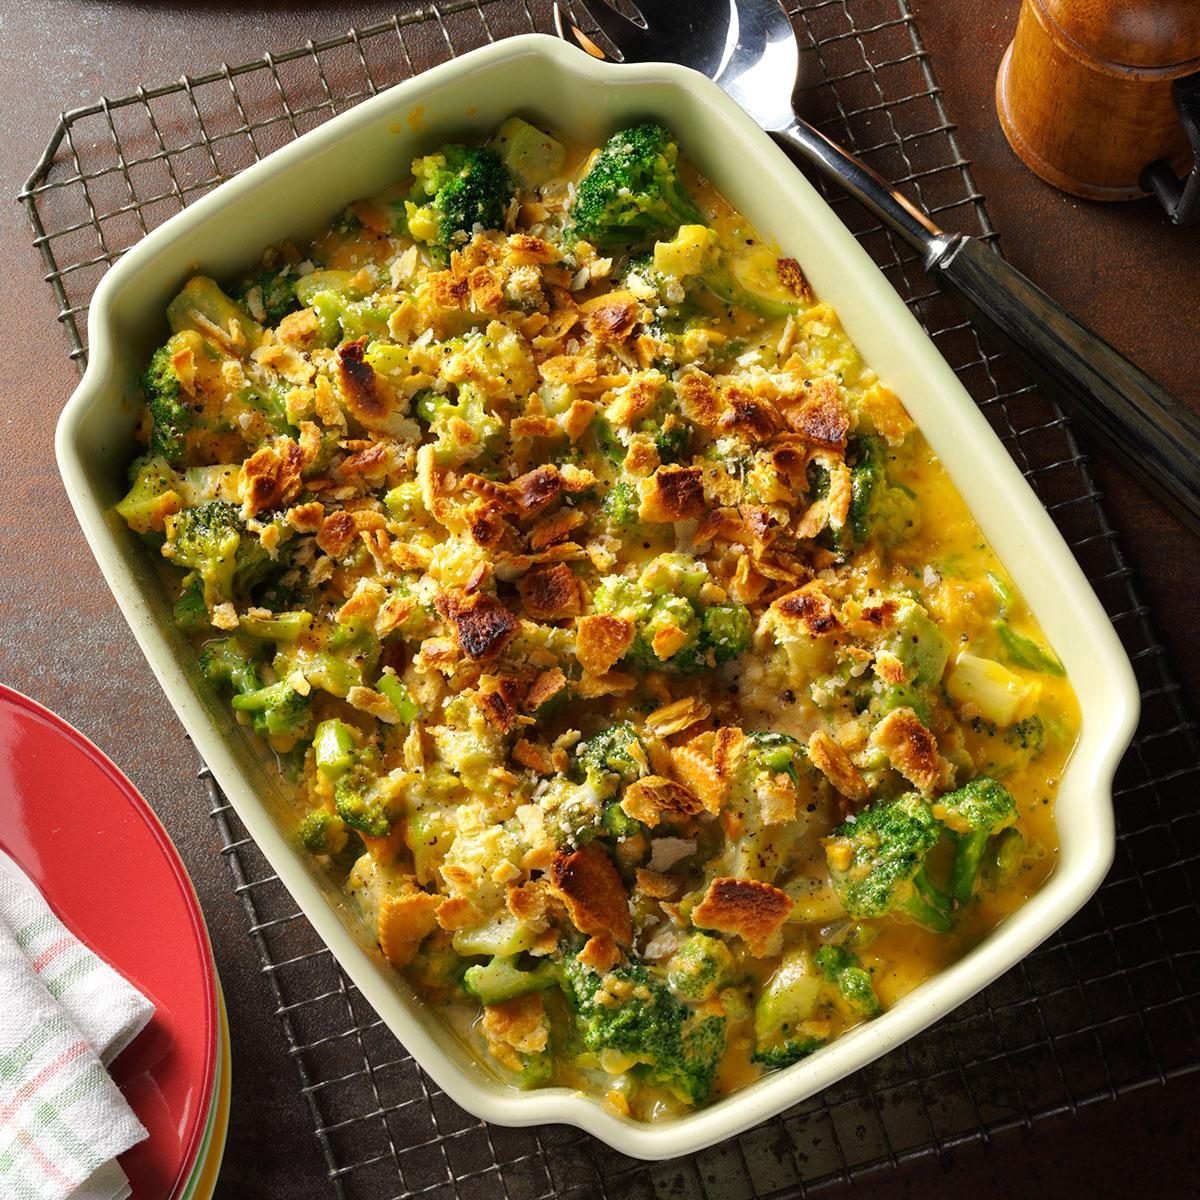 Crumb-Topped Broccoli Bake Recipe: How to Make It